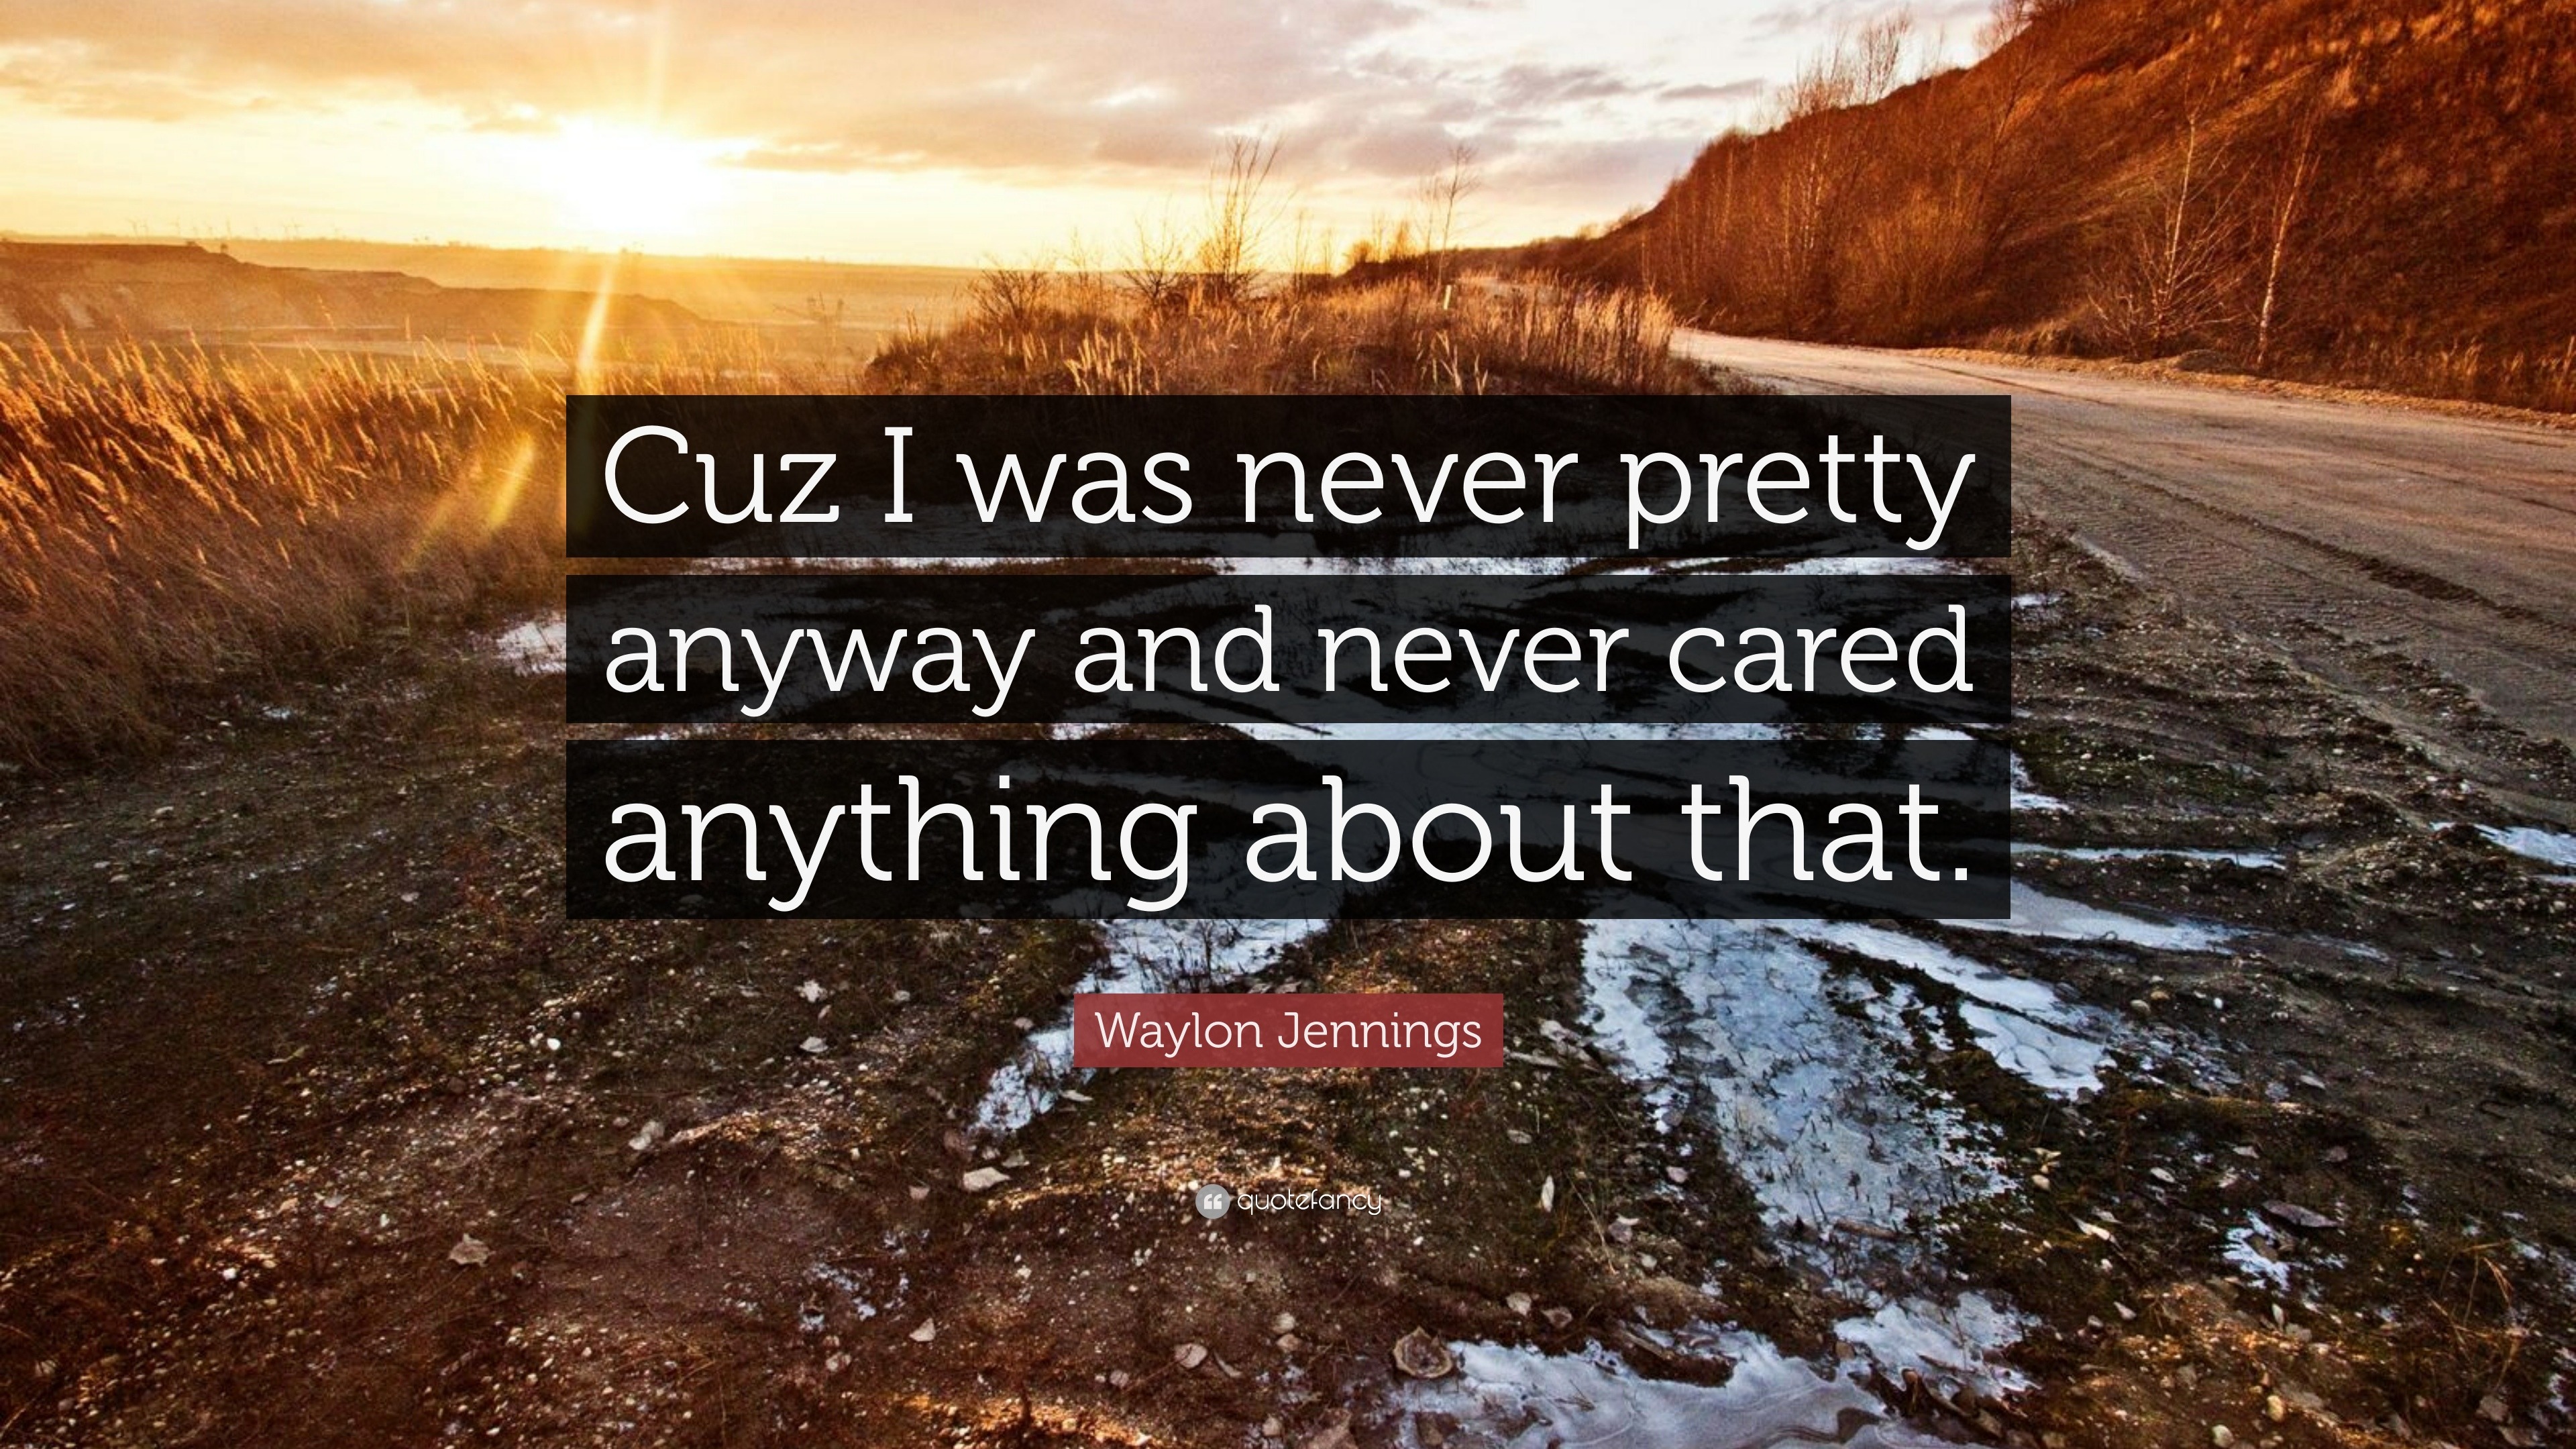 Waylon Jennings Quote: "Cuz I was never pretty anyway and ...